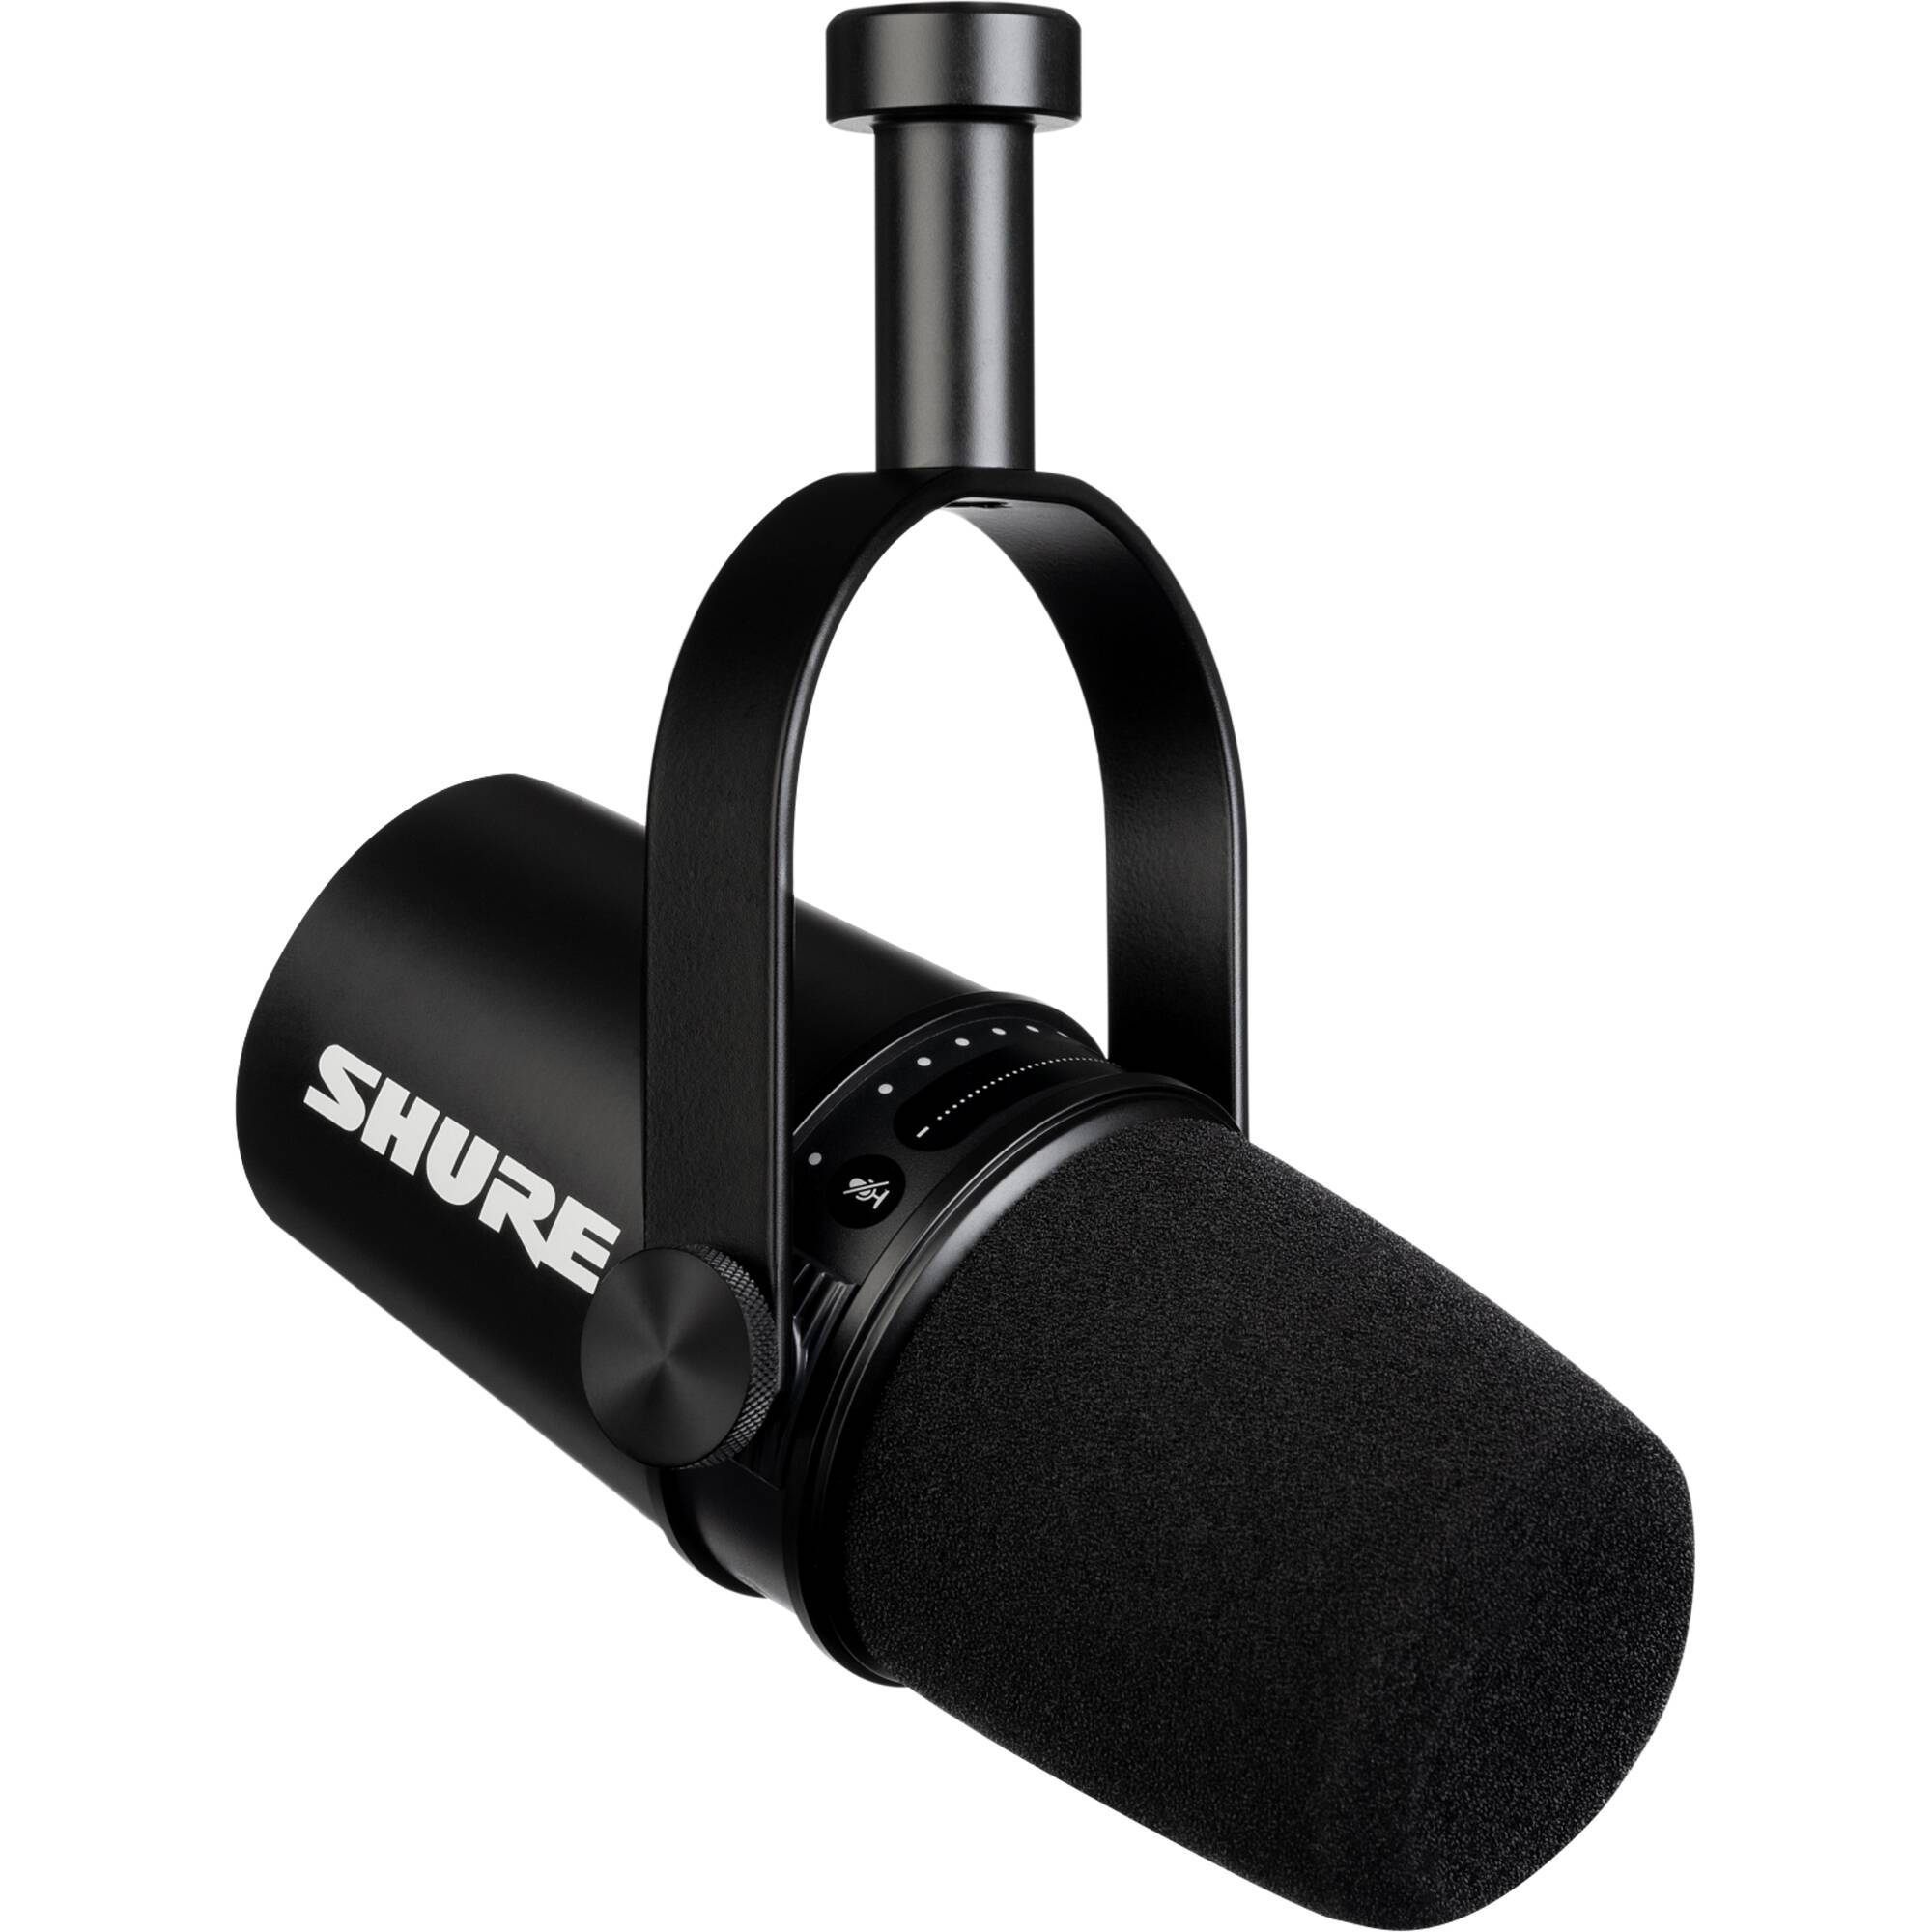 Shure Pro Track 5 A